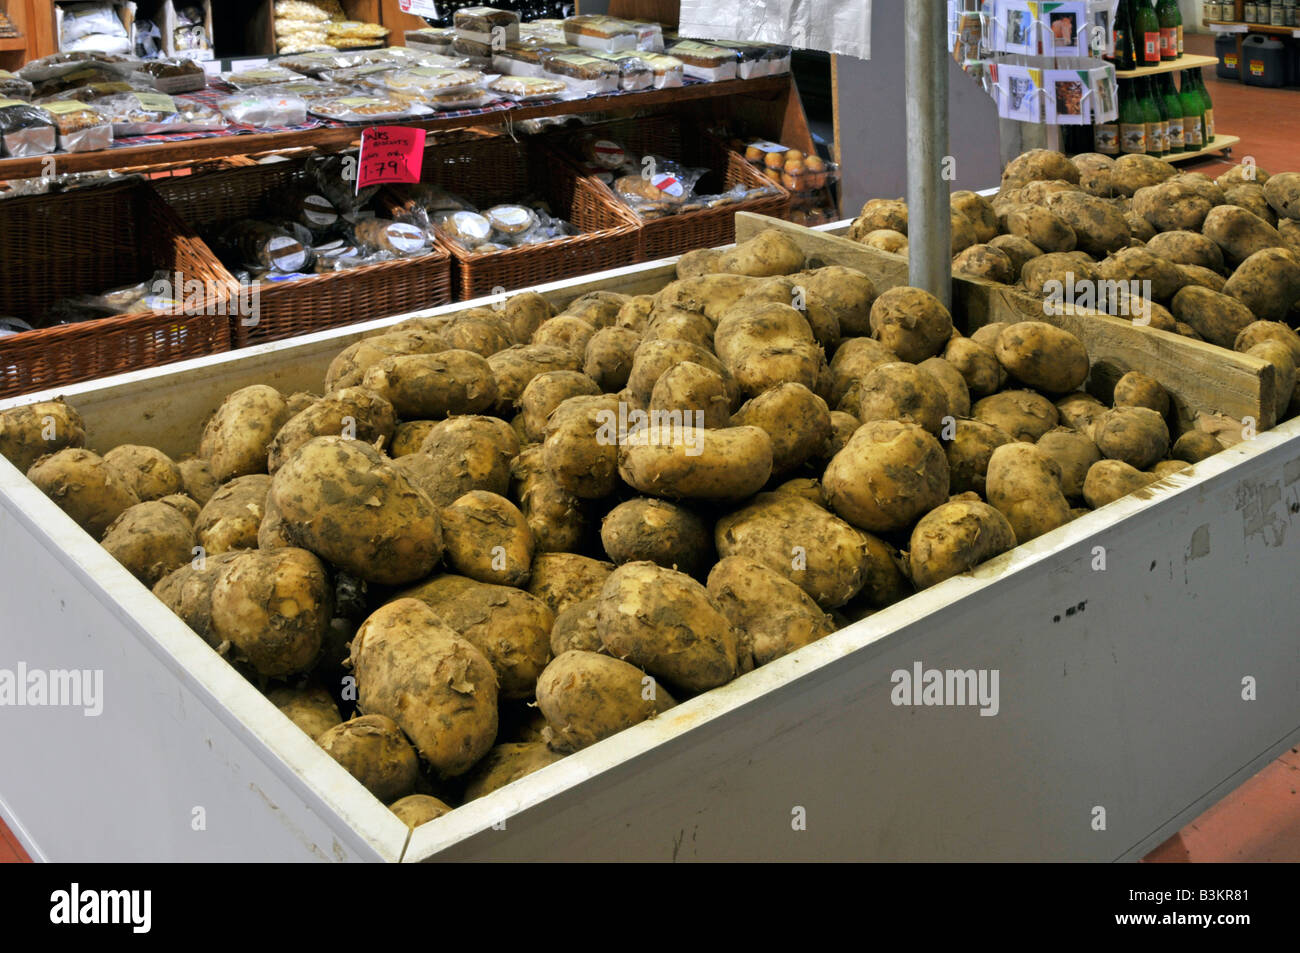 Interior Property Release view of retail farm shop business with Pentland Javelin potatoes in self service box Brentwood Essex England UK Stock Photo